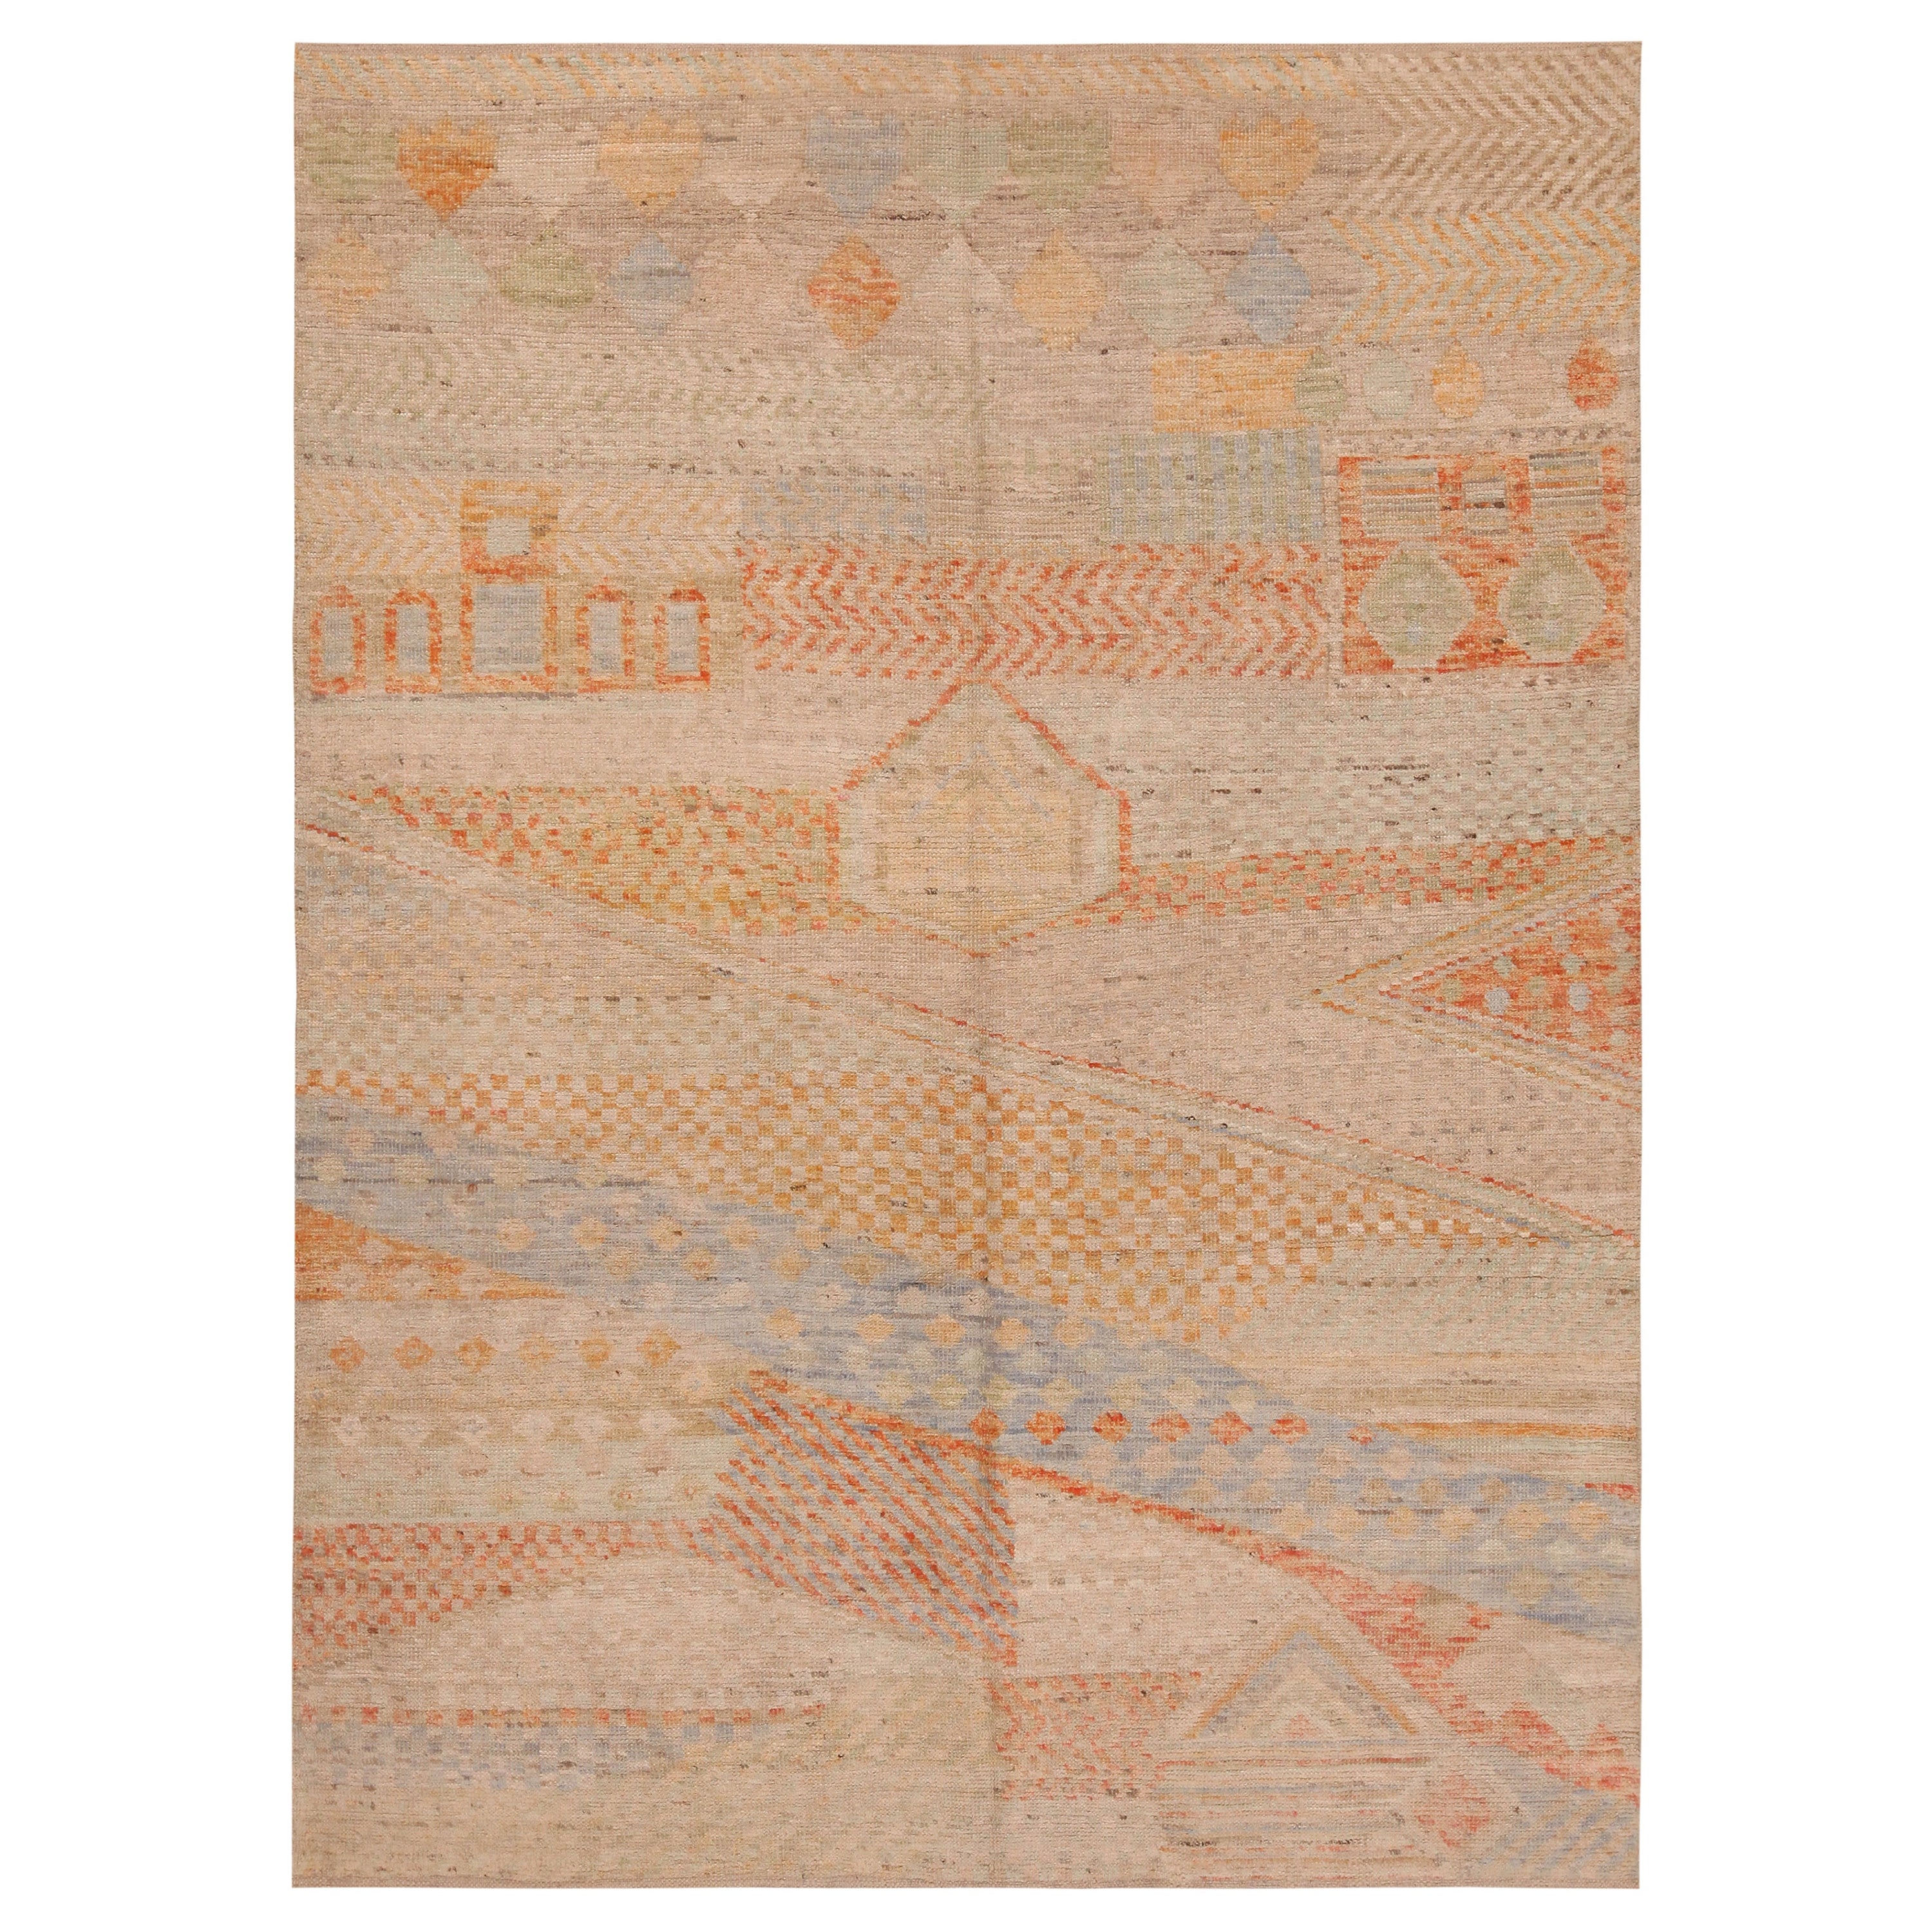 Nazmiyal Collection Rust Tones Modern Moroccan Rug. 5 ft 9 in x 7 ft 9 in